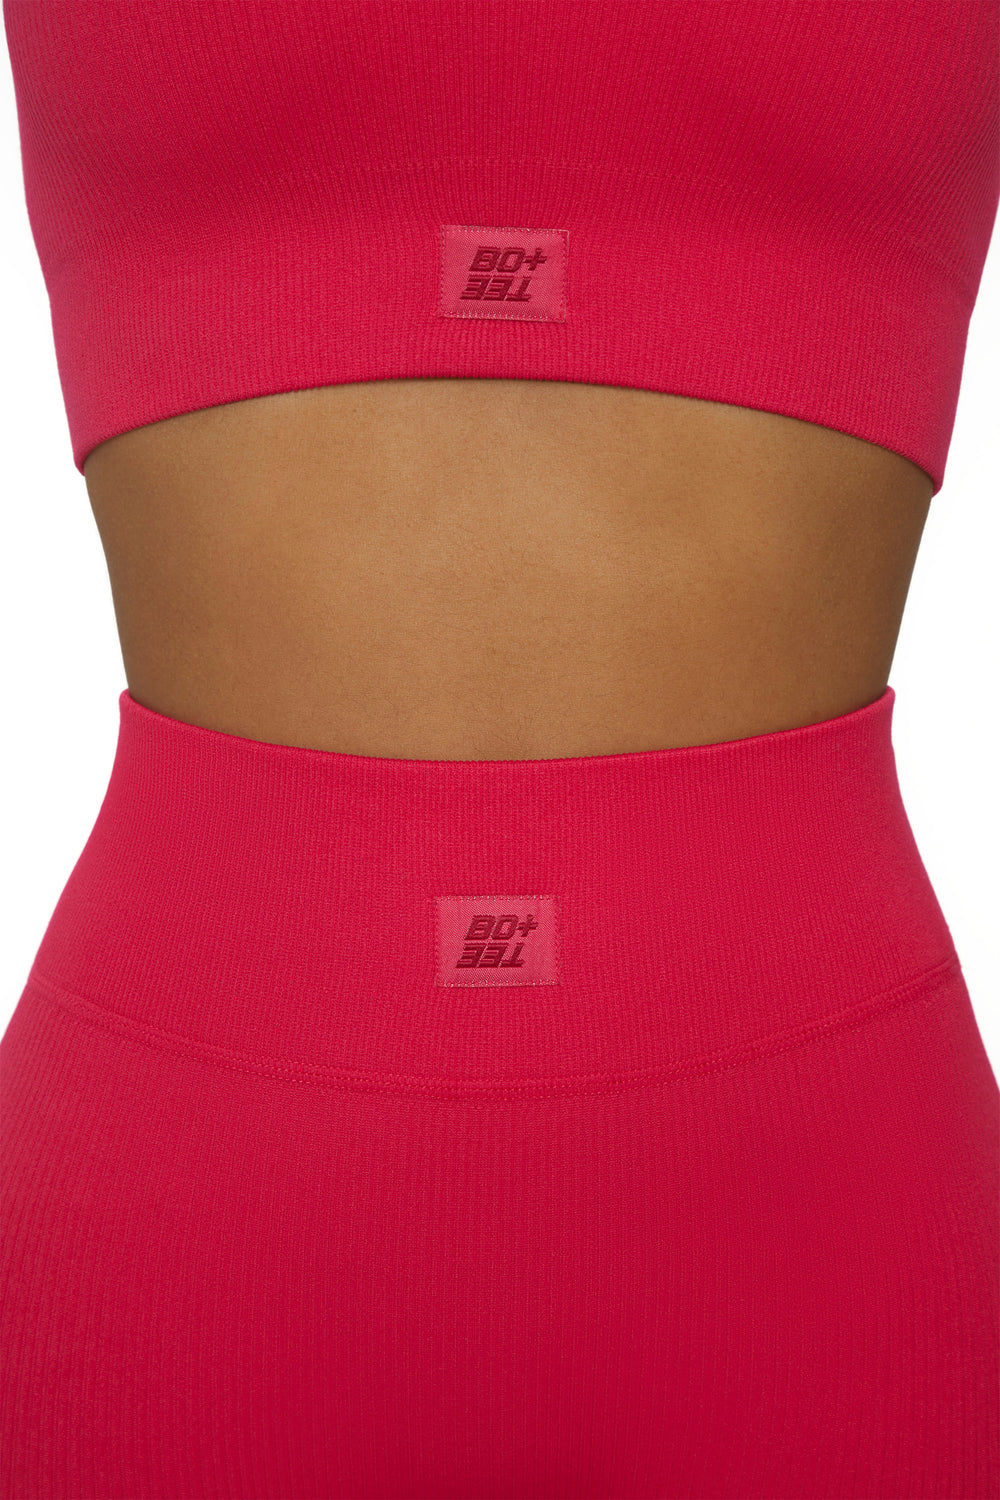 Back In Gear Ribbed High Waist Leggings in Hot Pink